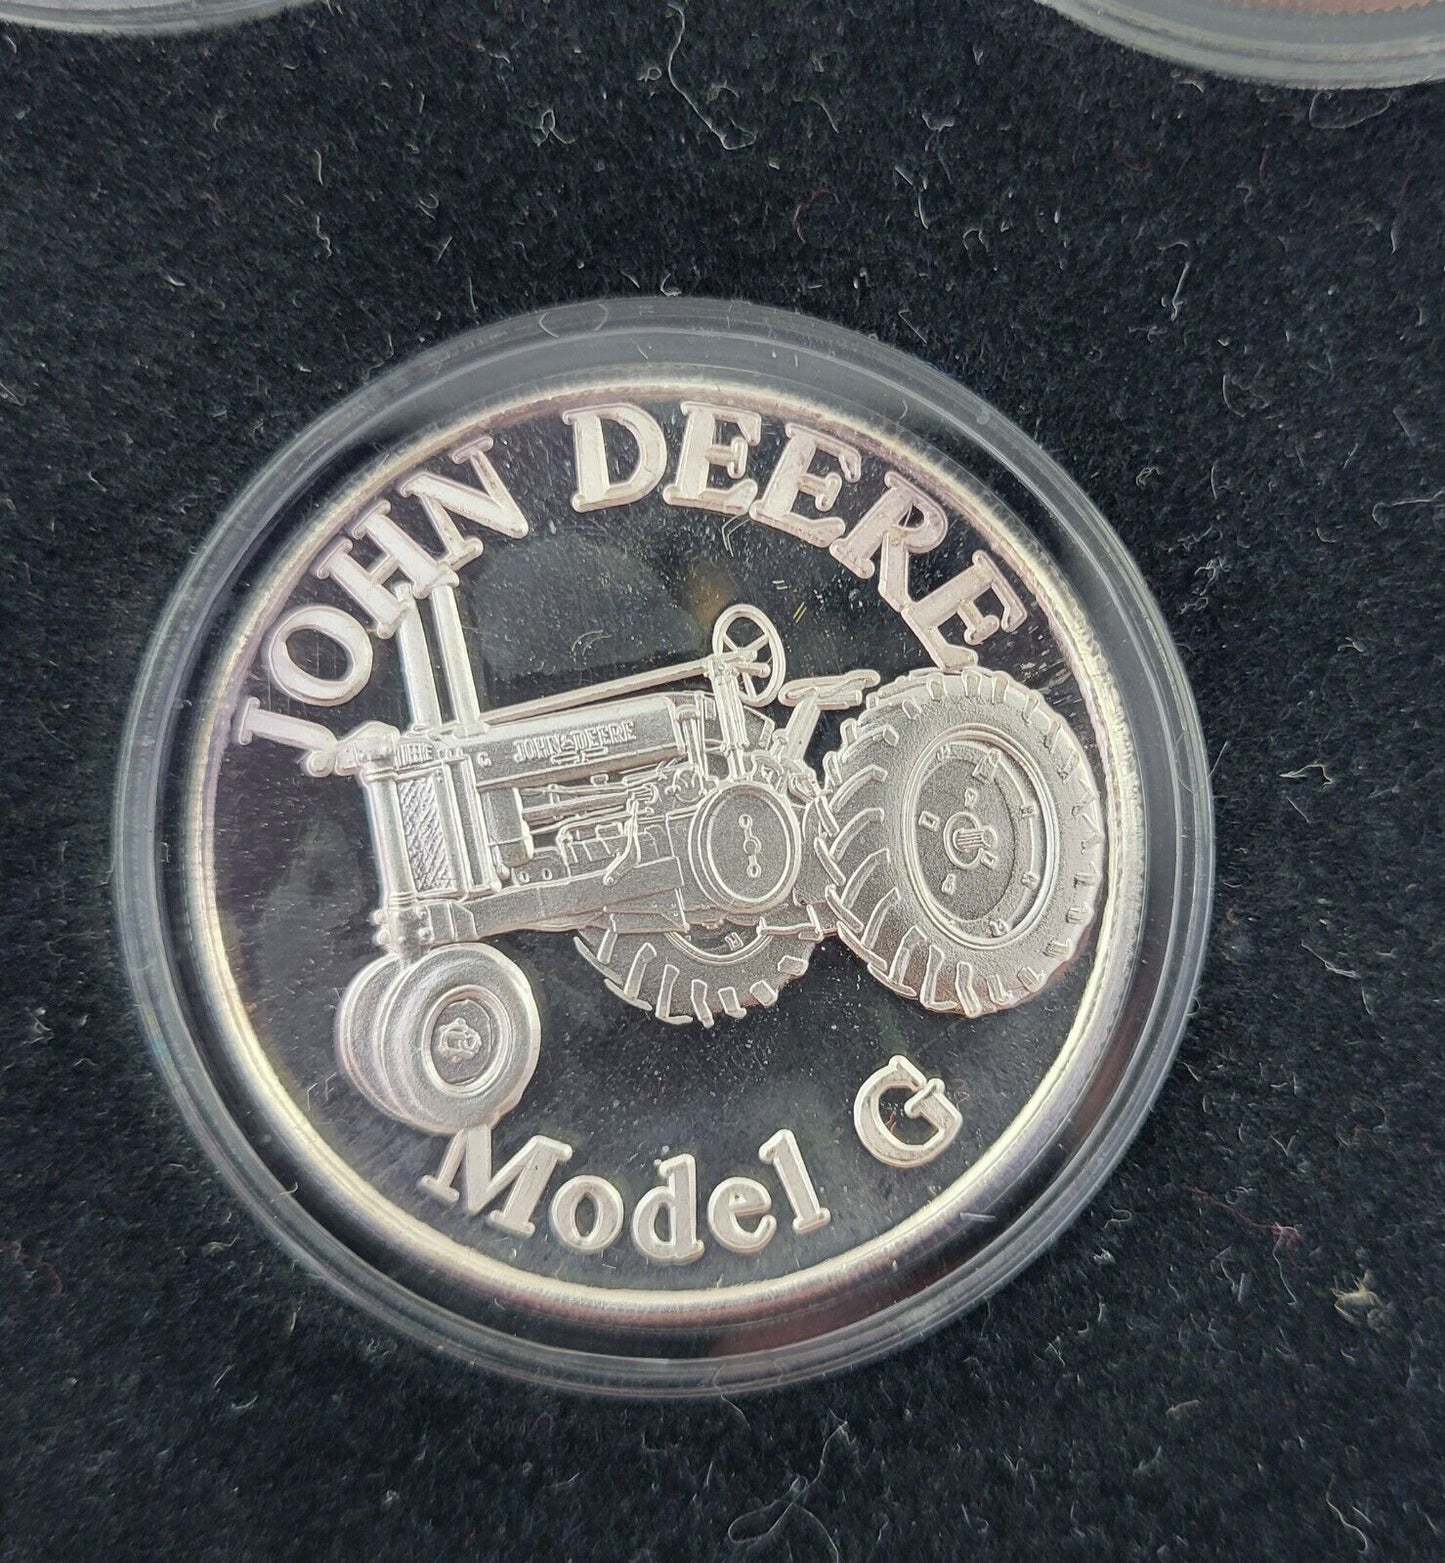 John Deere Tractor 5pc Set Of 1 oz .999 Fine Silver Rounds In Plastic & Boxed